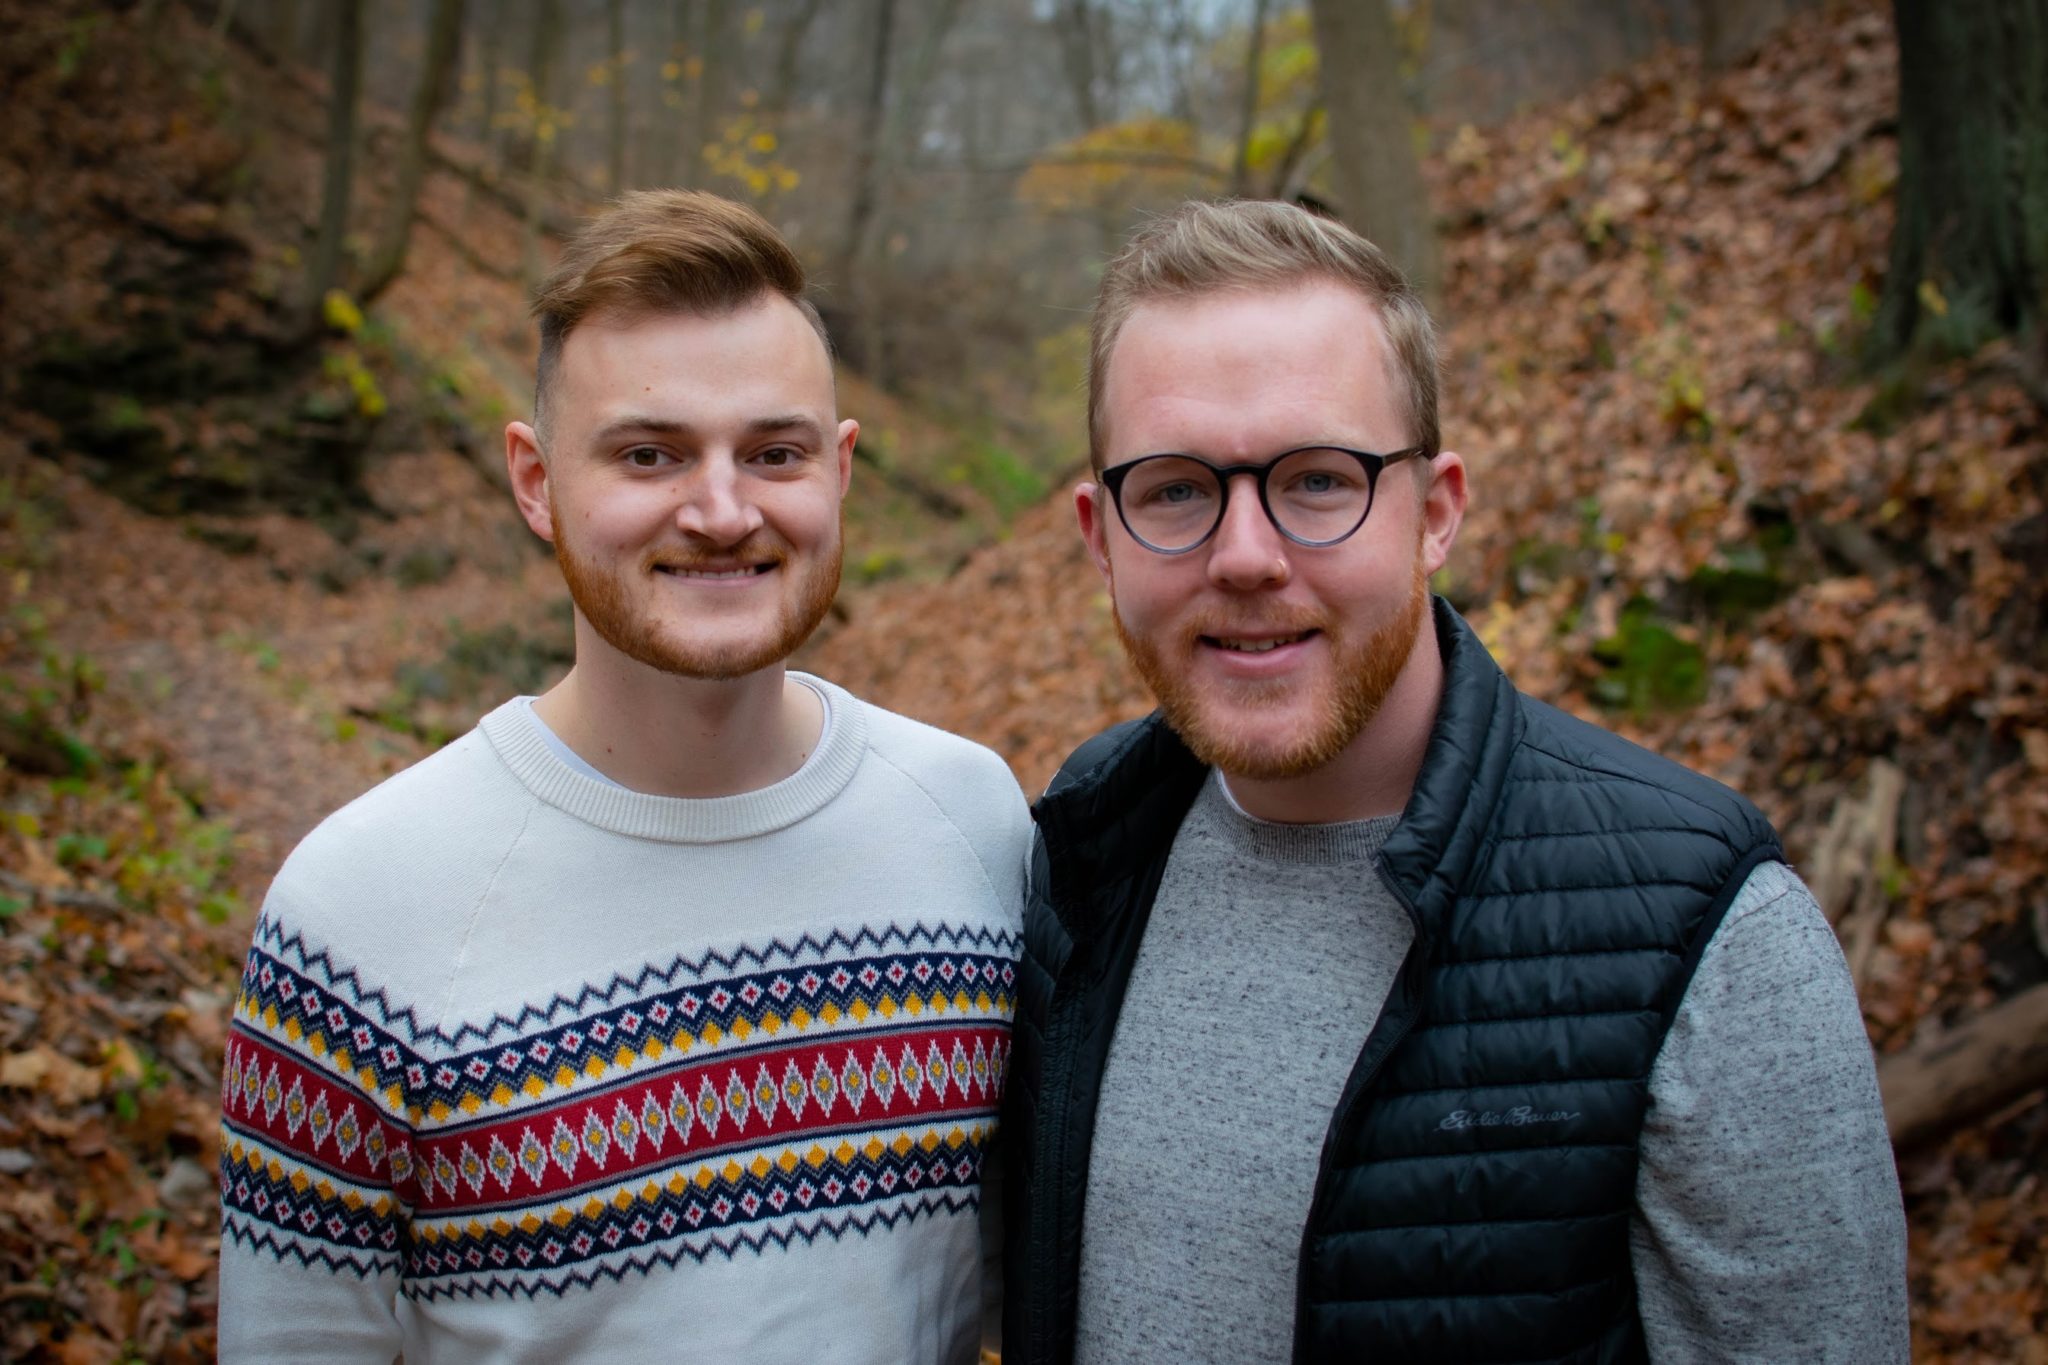 Quintin and Jeff posing together in Schenley Park on an autumn day